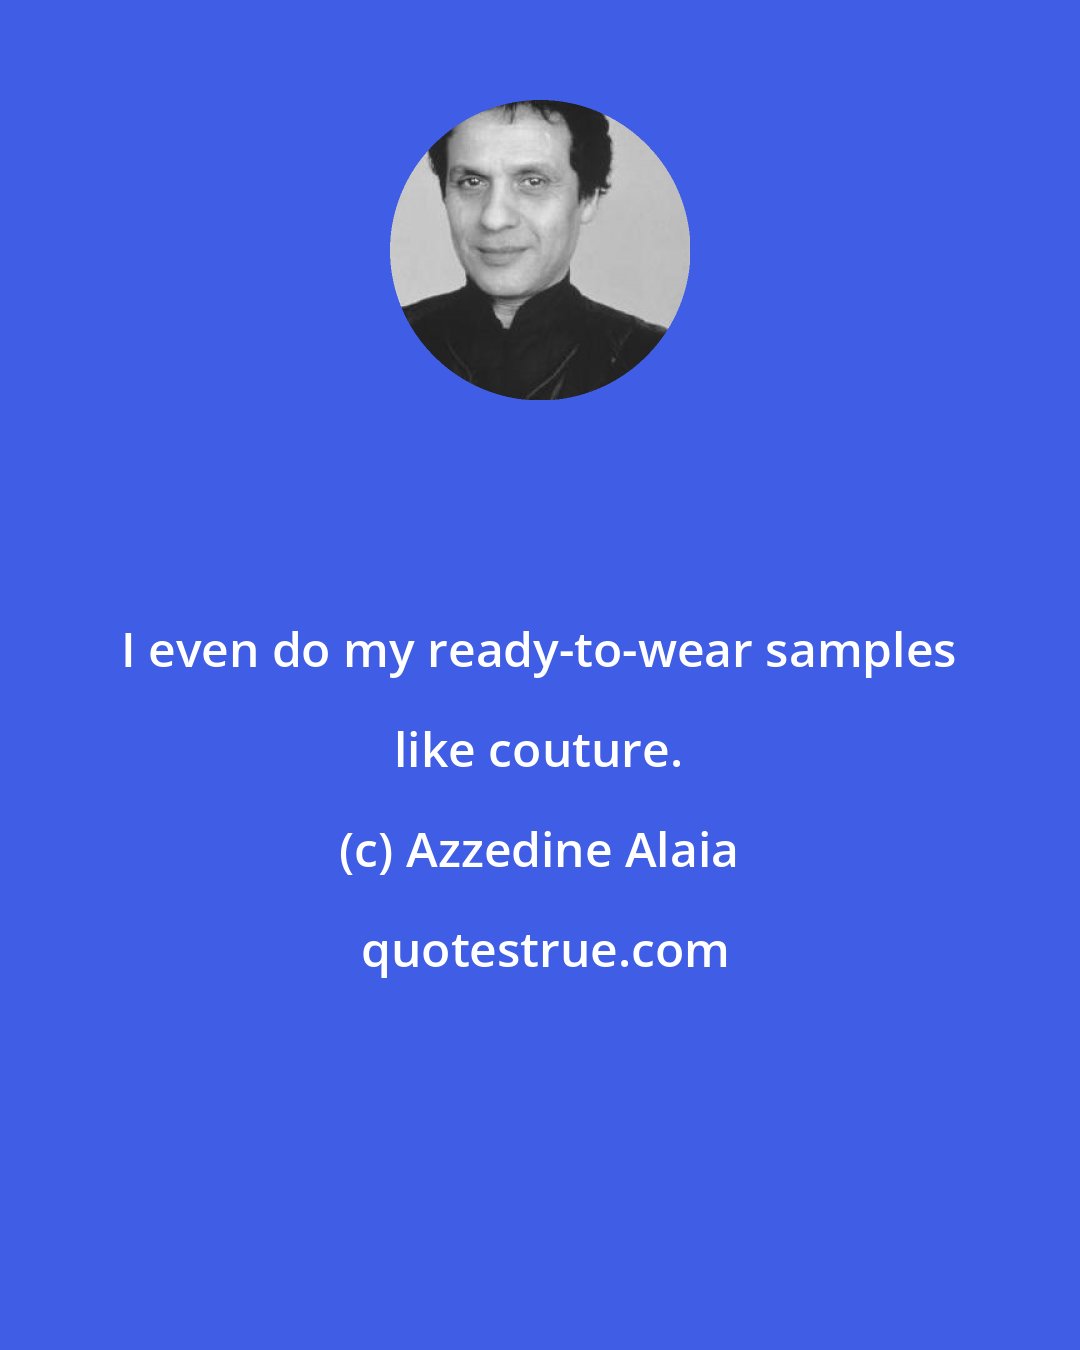 Azzedine Alaia: I even do my ready-to-wear samples like couture.